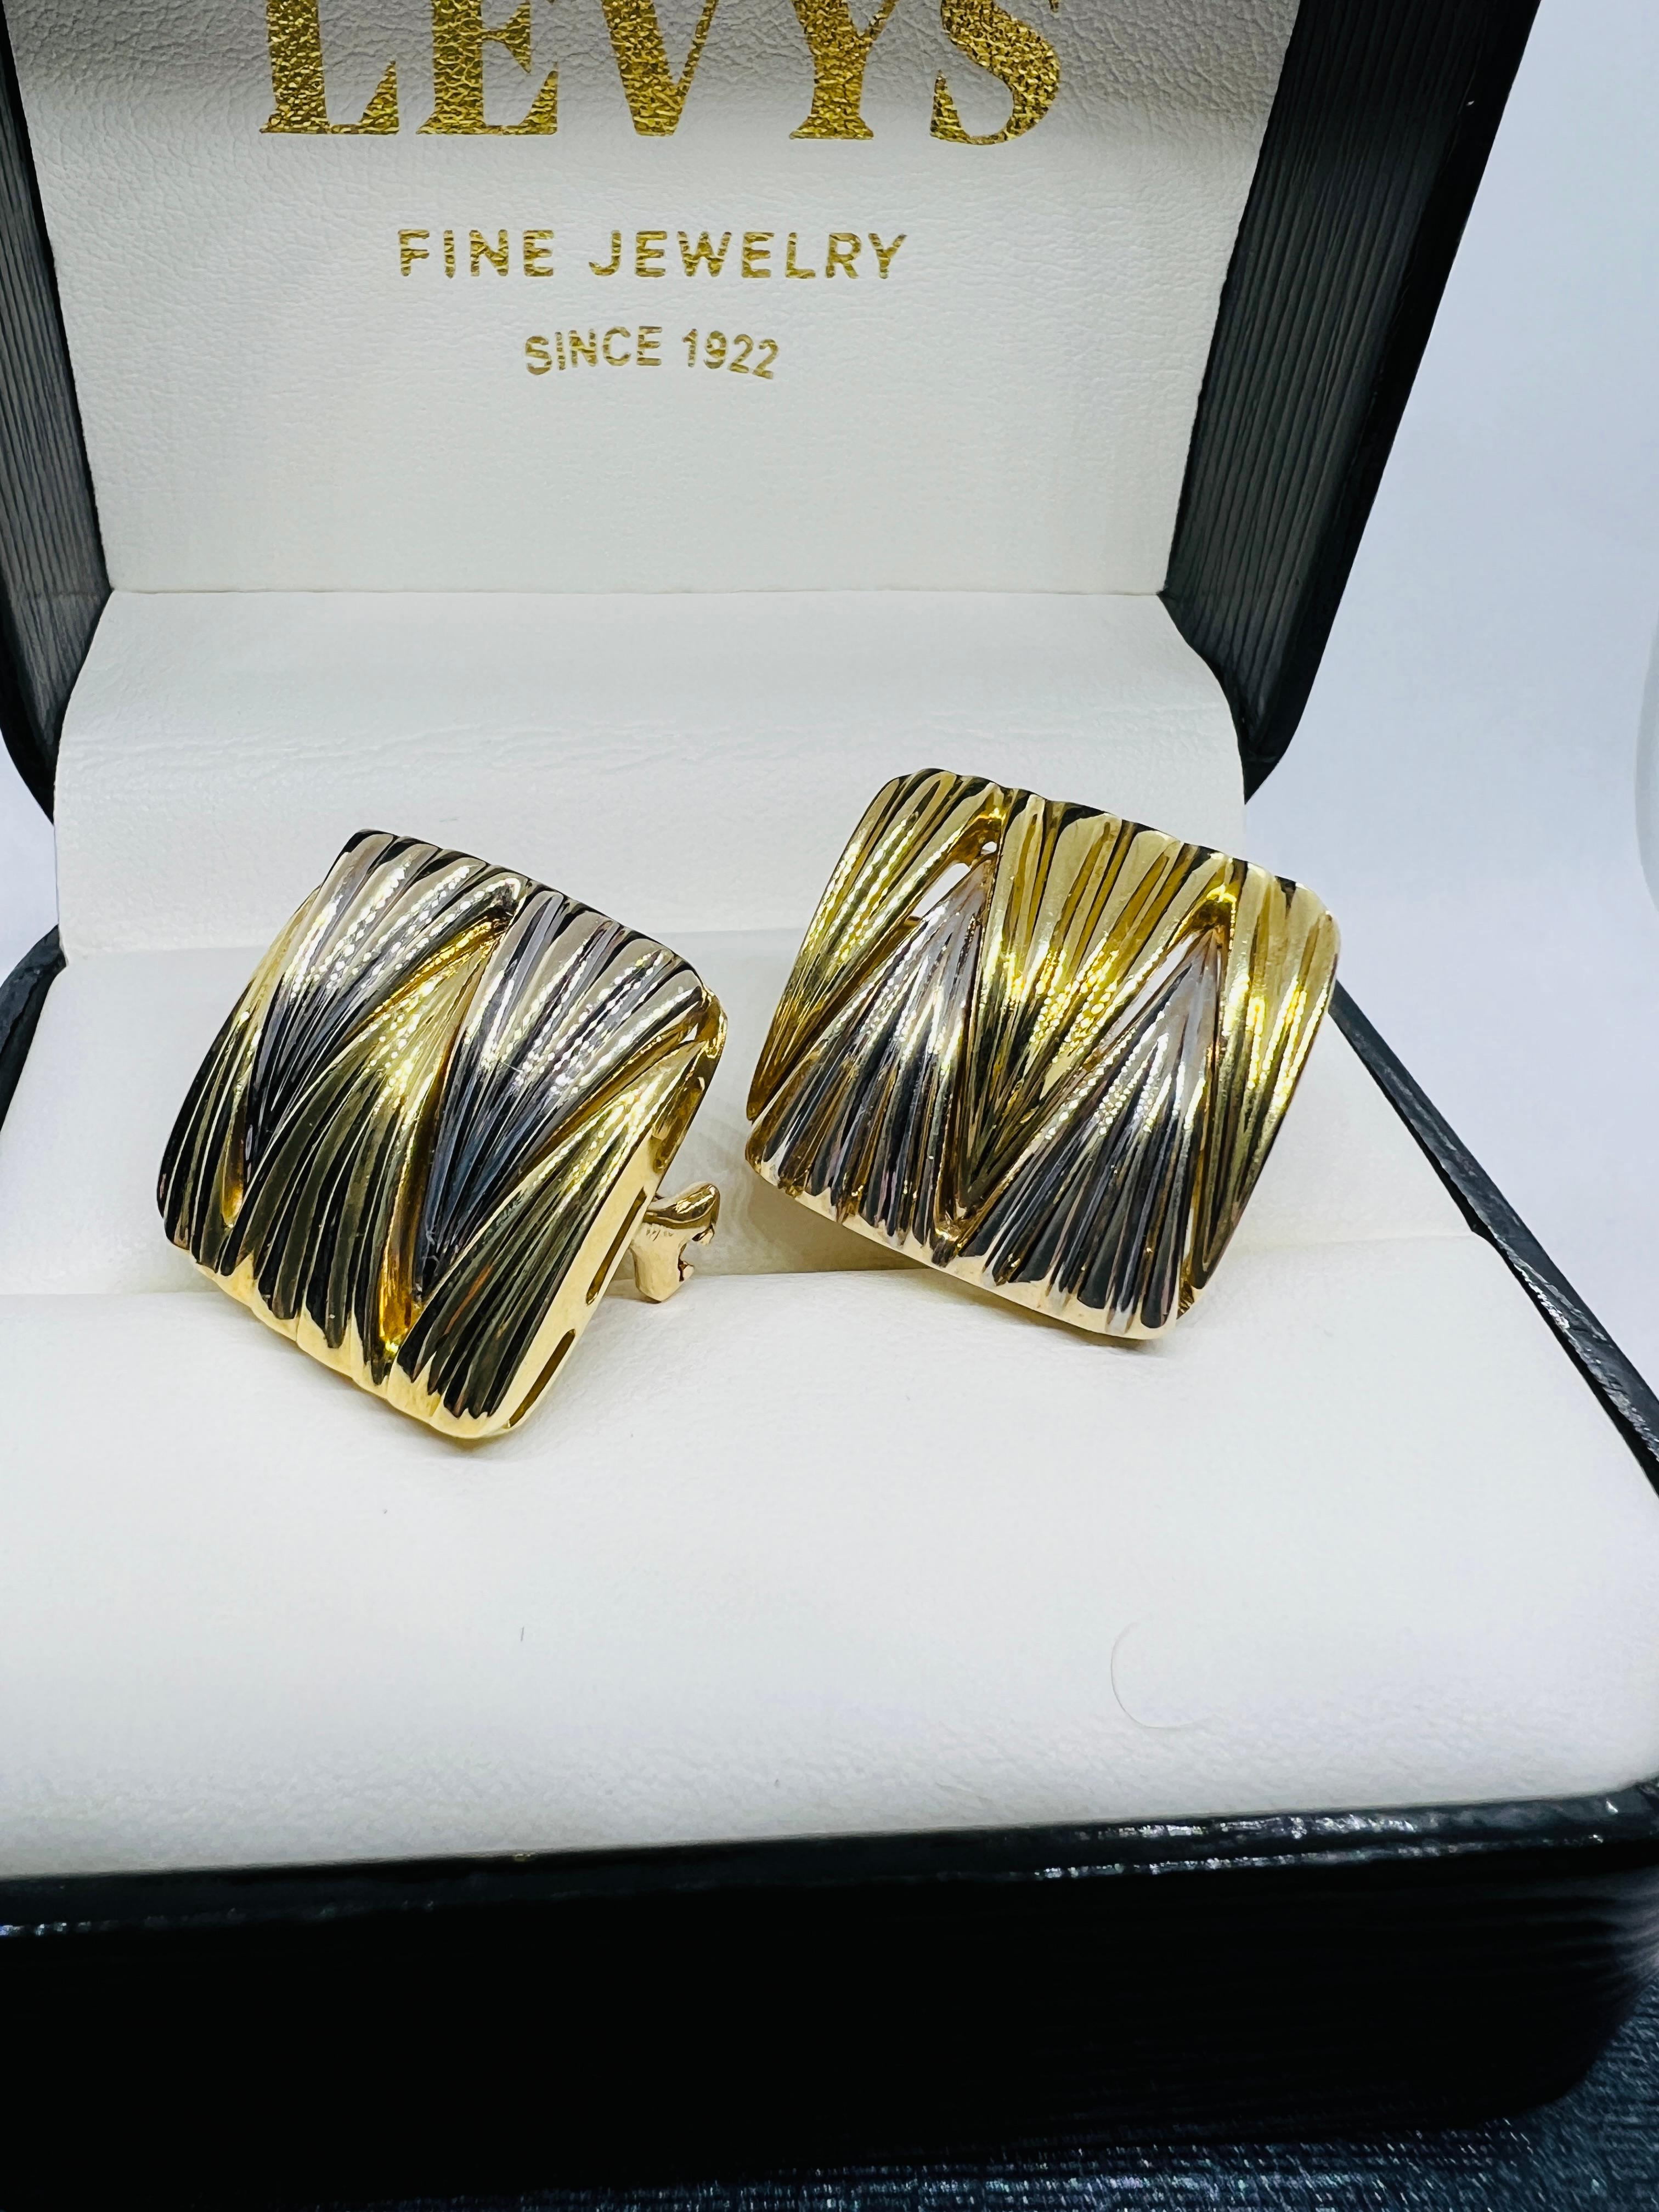 Absolutely Stunning Designer Michael Bondanza Square Huggie Earrings! These measure three quarter inch square and weigh 19.5 grams. They are 18k Yellow Gold and Platinum that are interwoven in a whimsical zig zag pattern.